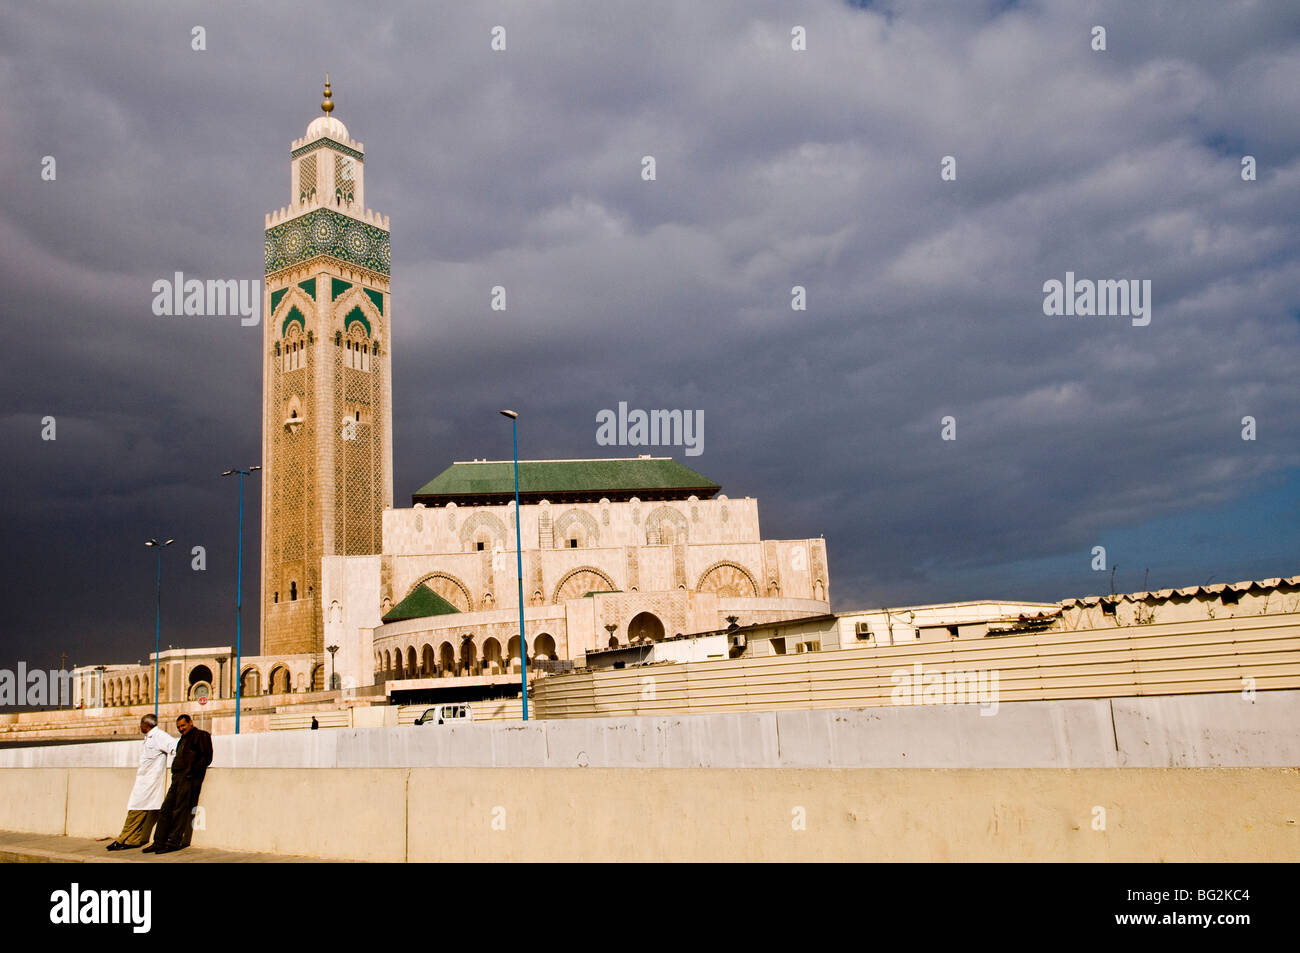 Hassan II mosque is the world's third largest mosque. The Mosque was open in 1993 for the former king 60th birthday. Stock Photo